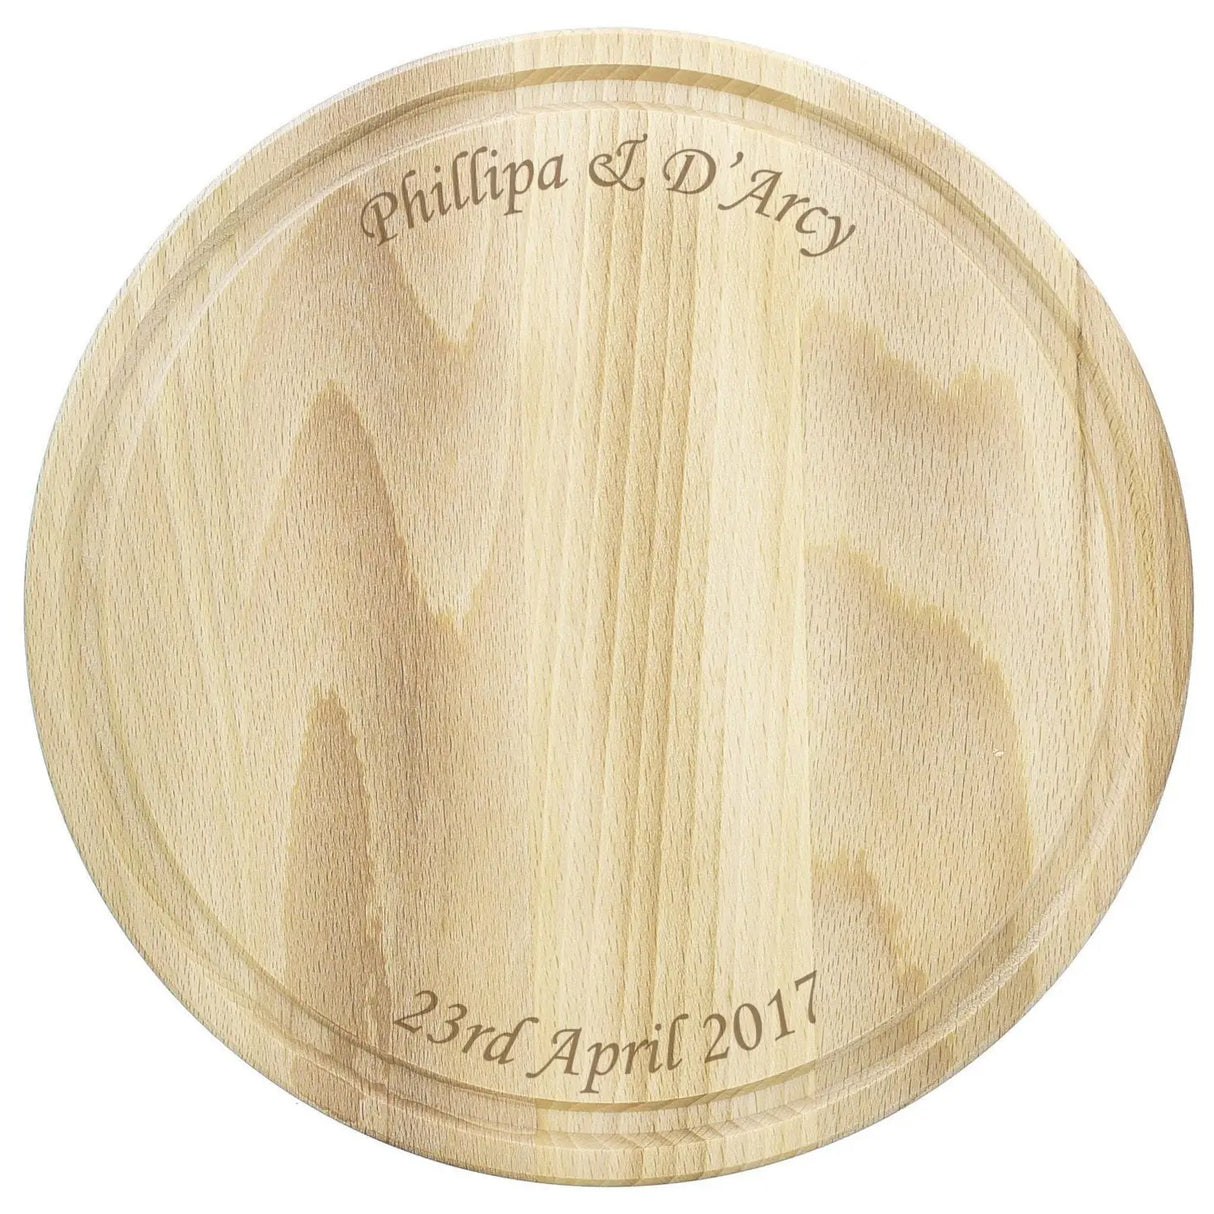 Personalised Round Chopping Board - Gift Moments